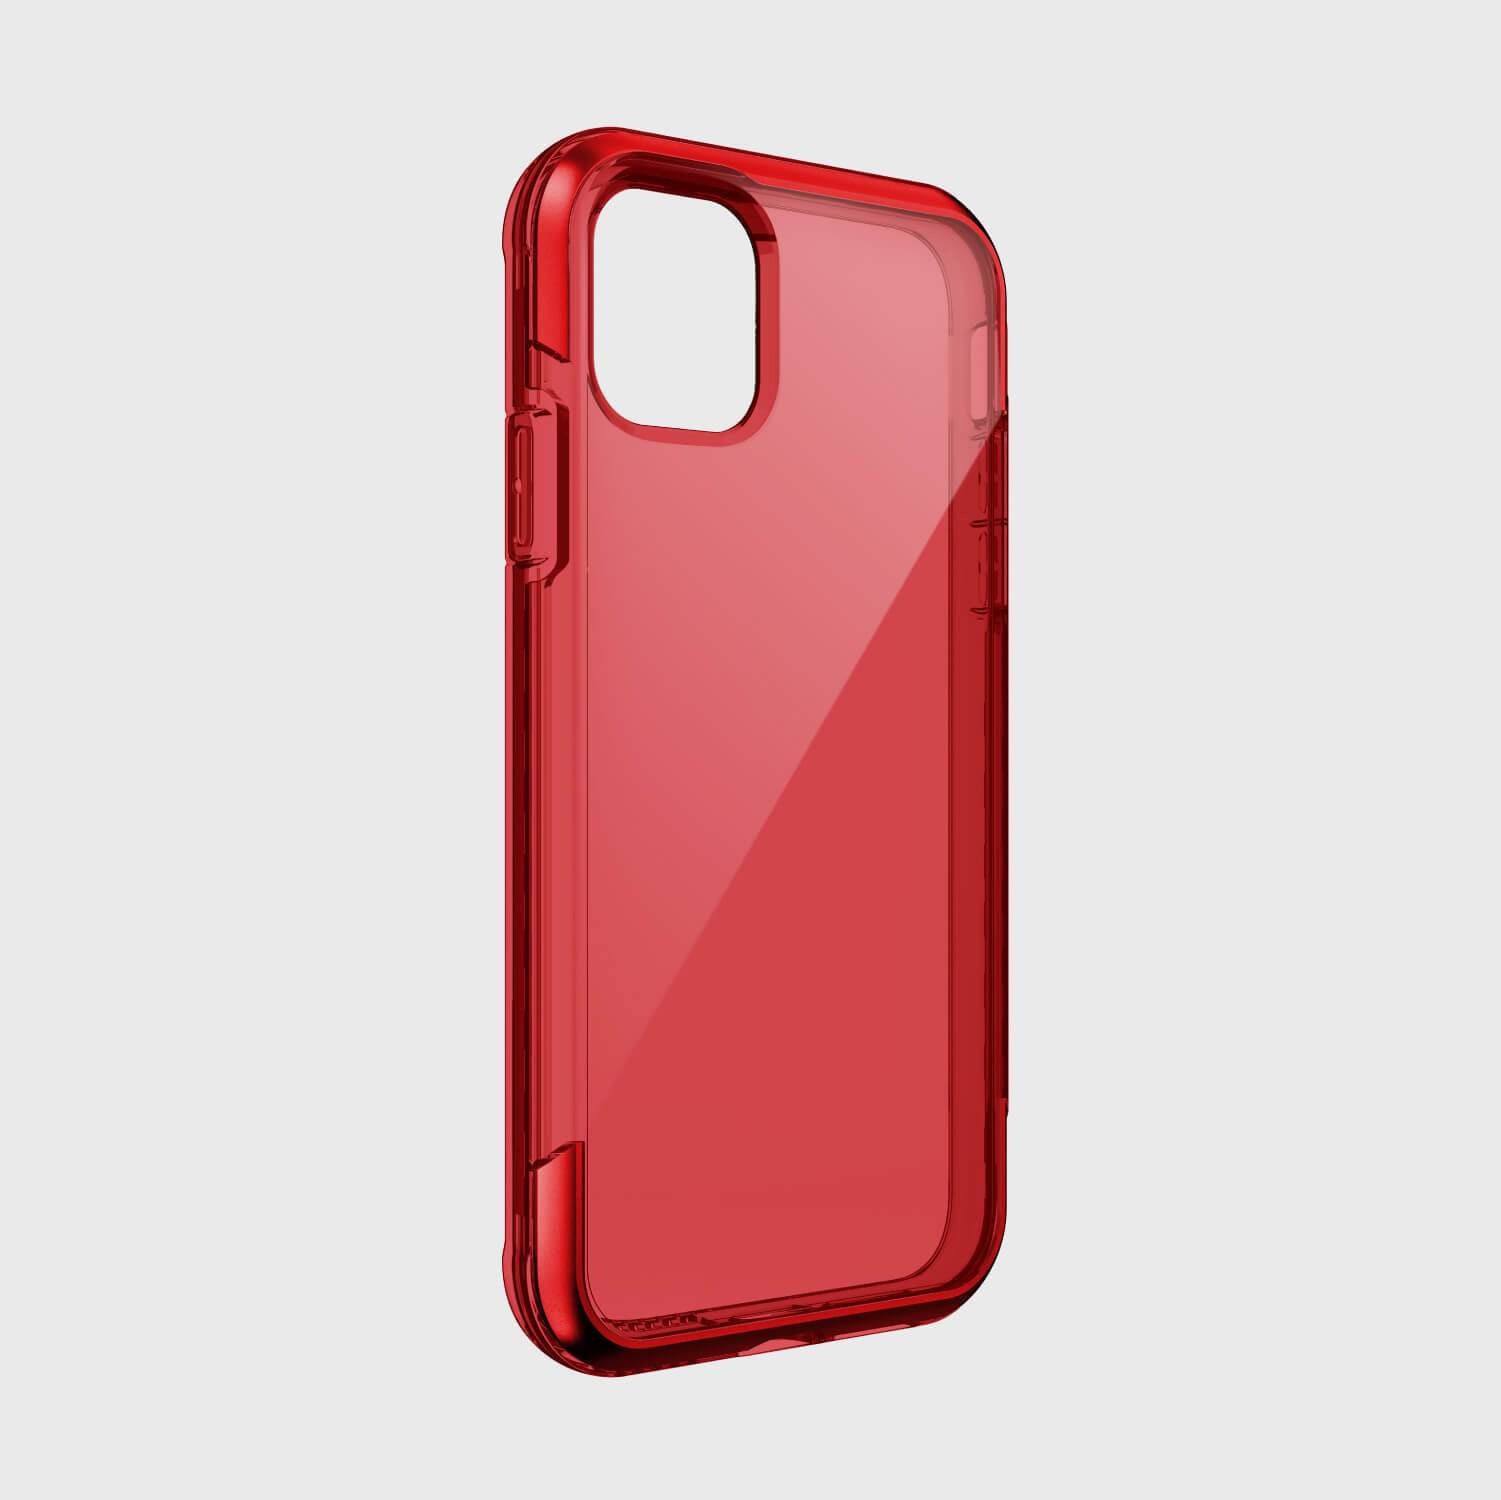 A red Raptic iPhone 11 Pro Max case providing 13 foot drop protection on a white background.